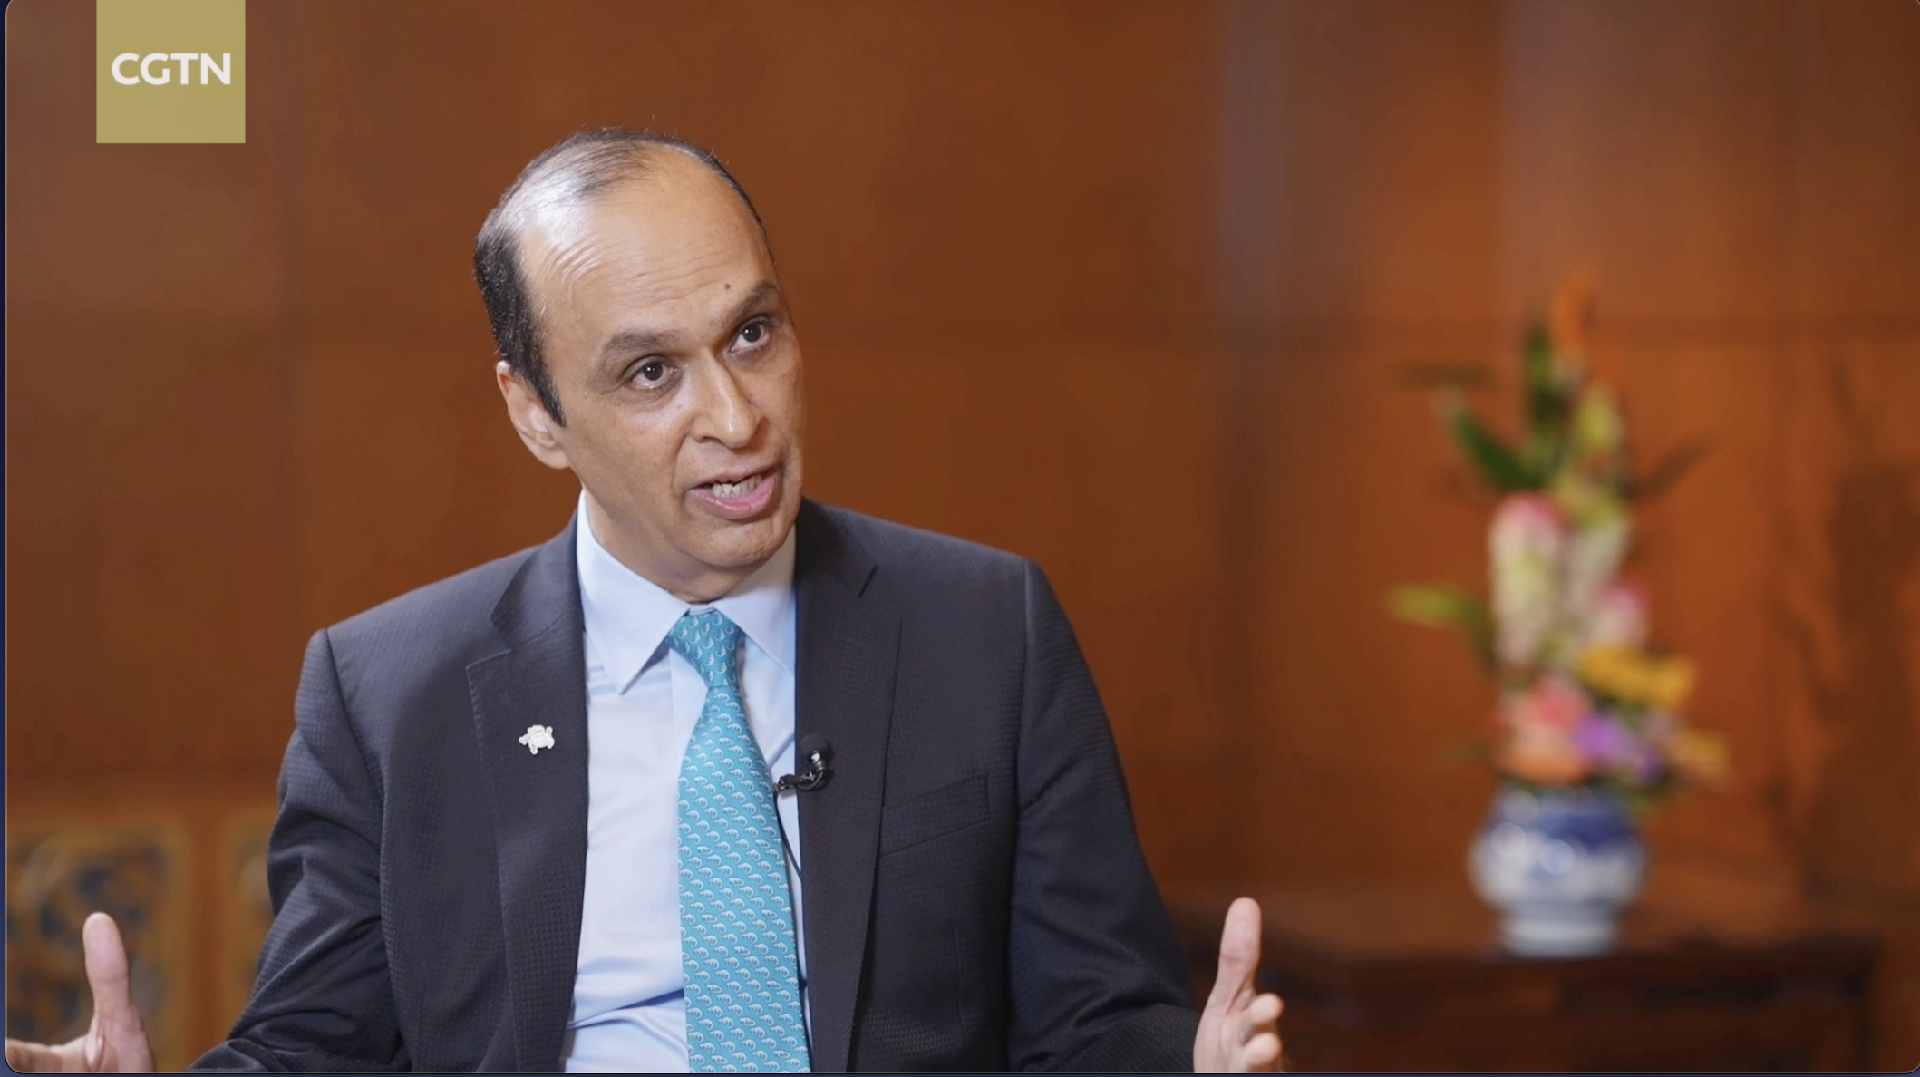 Prudential CEO discusses strategy, investment in China [Video]